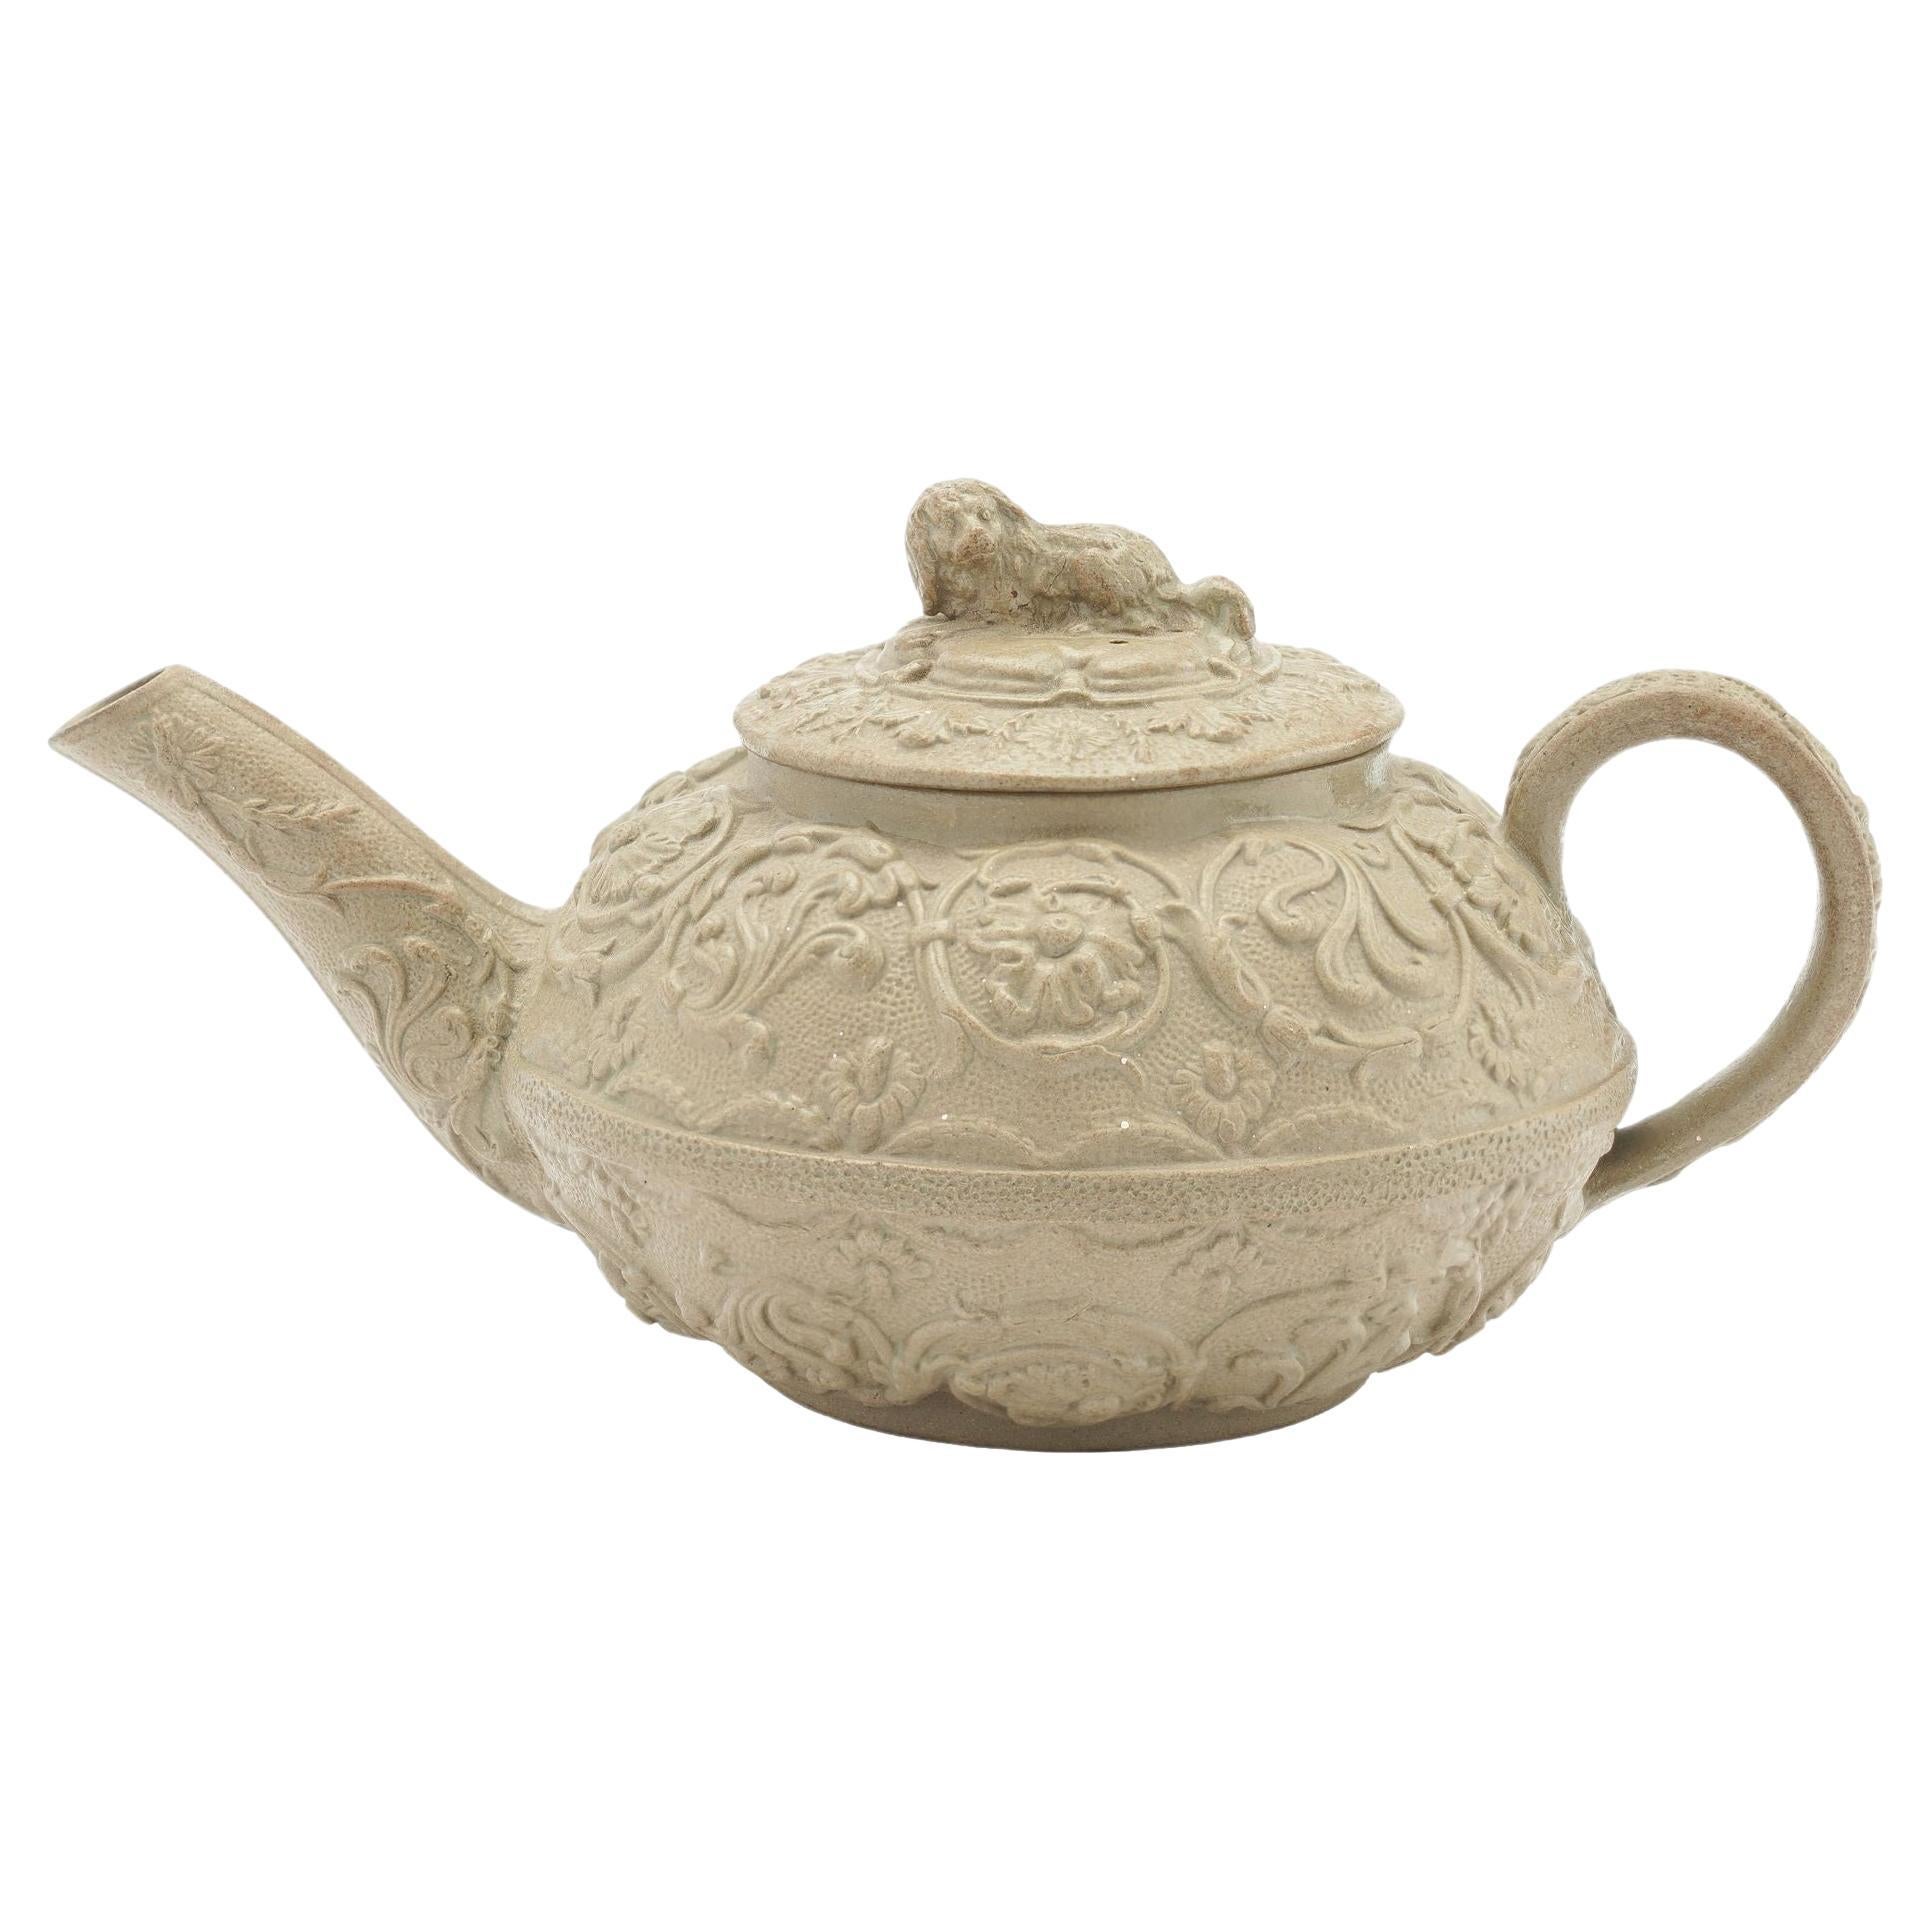 Stoneware tea pot with spaniel lid finial by Wedgwood, c. 1829